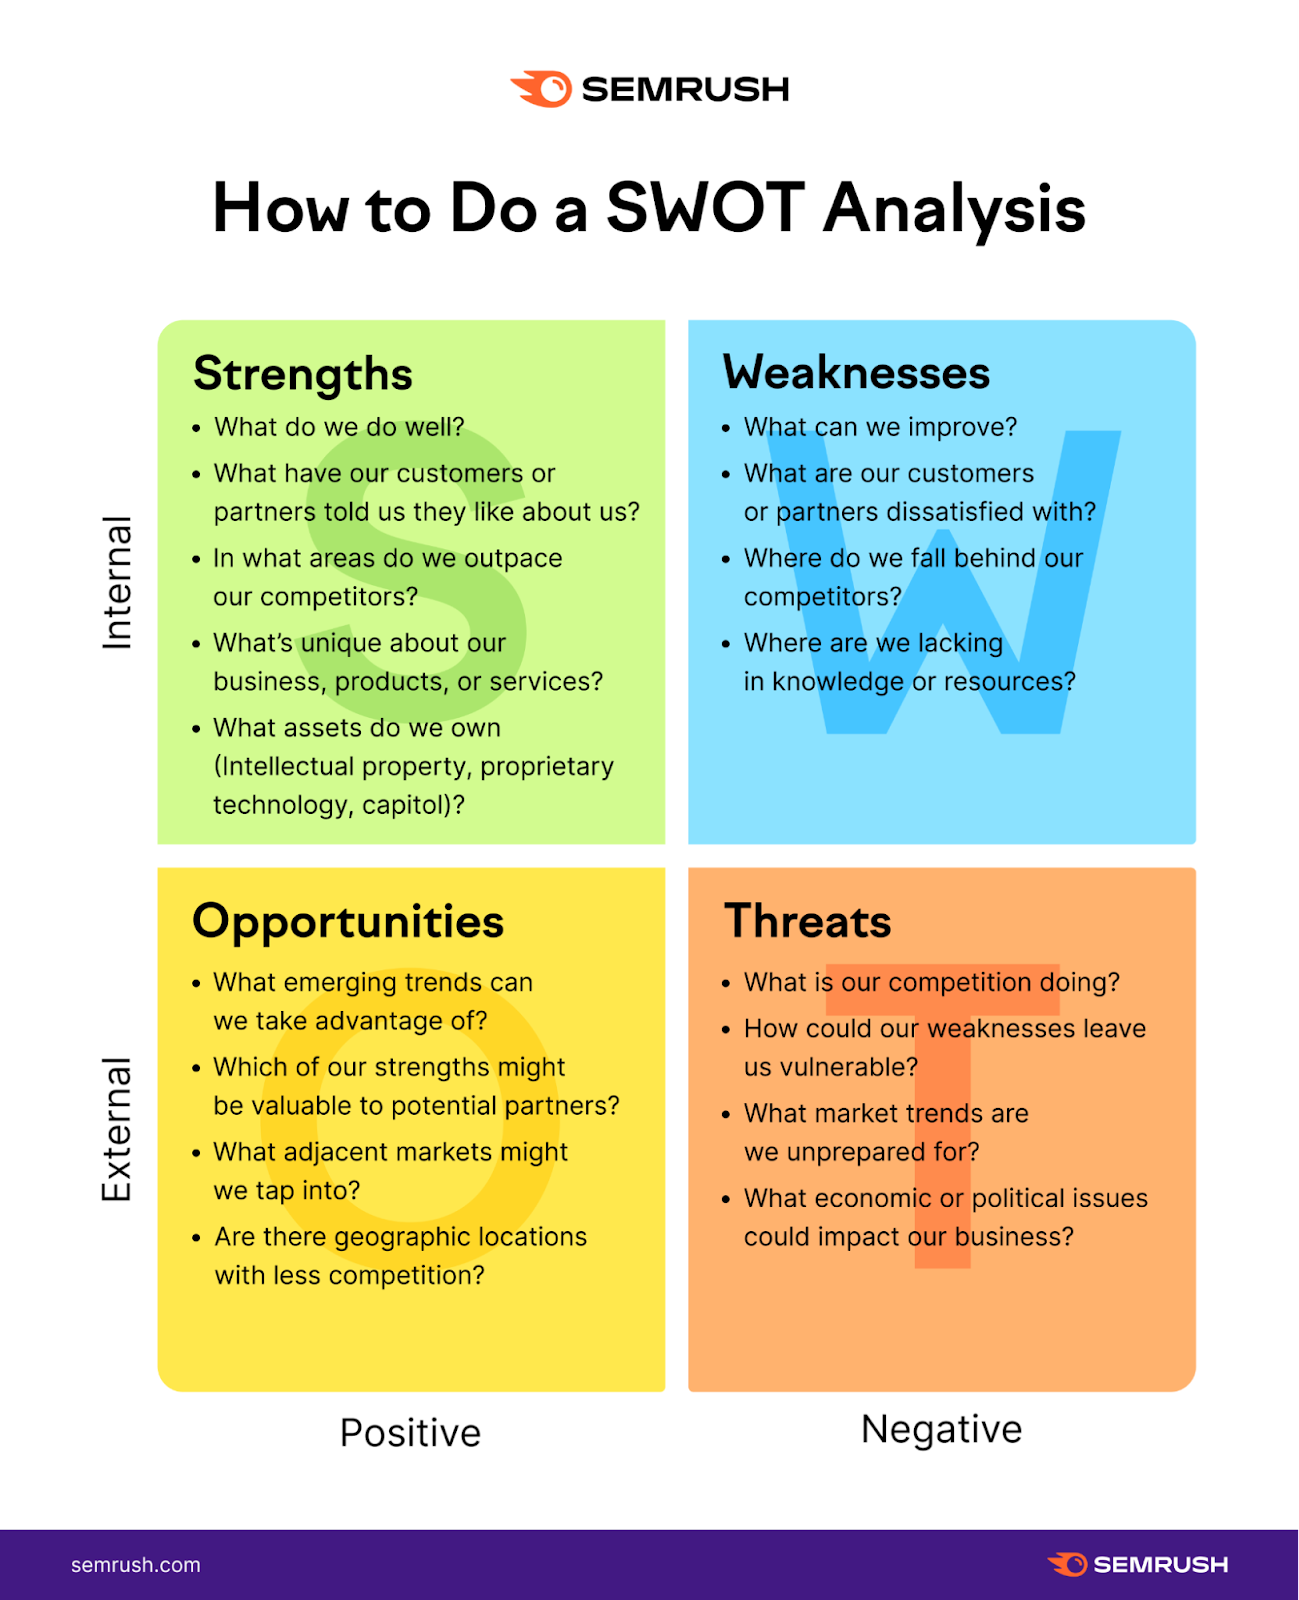 An infographic on ،w to do a SWOT ،ysis